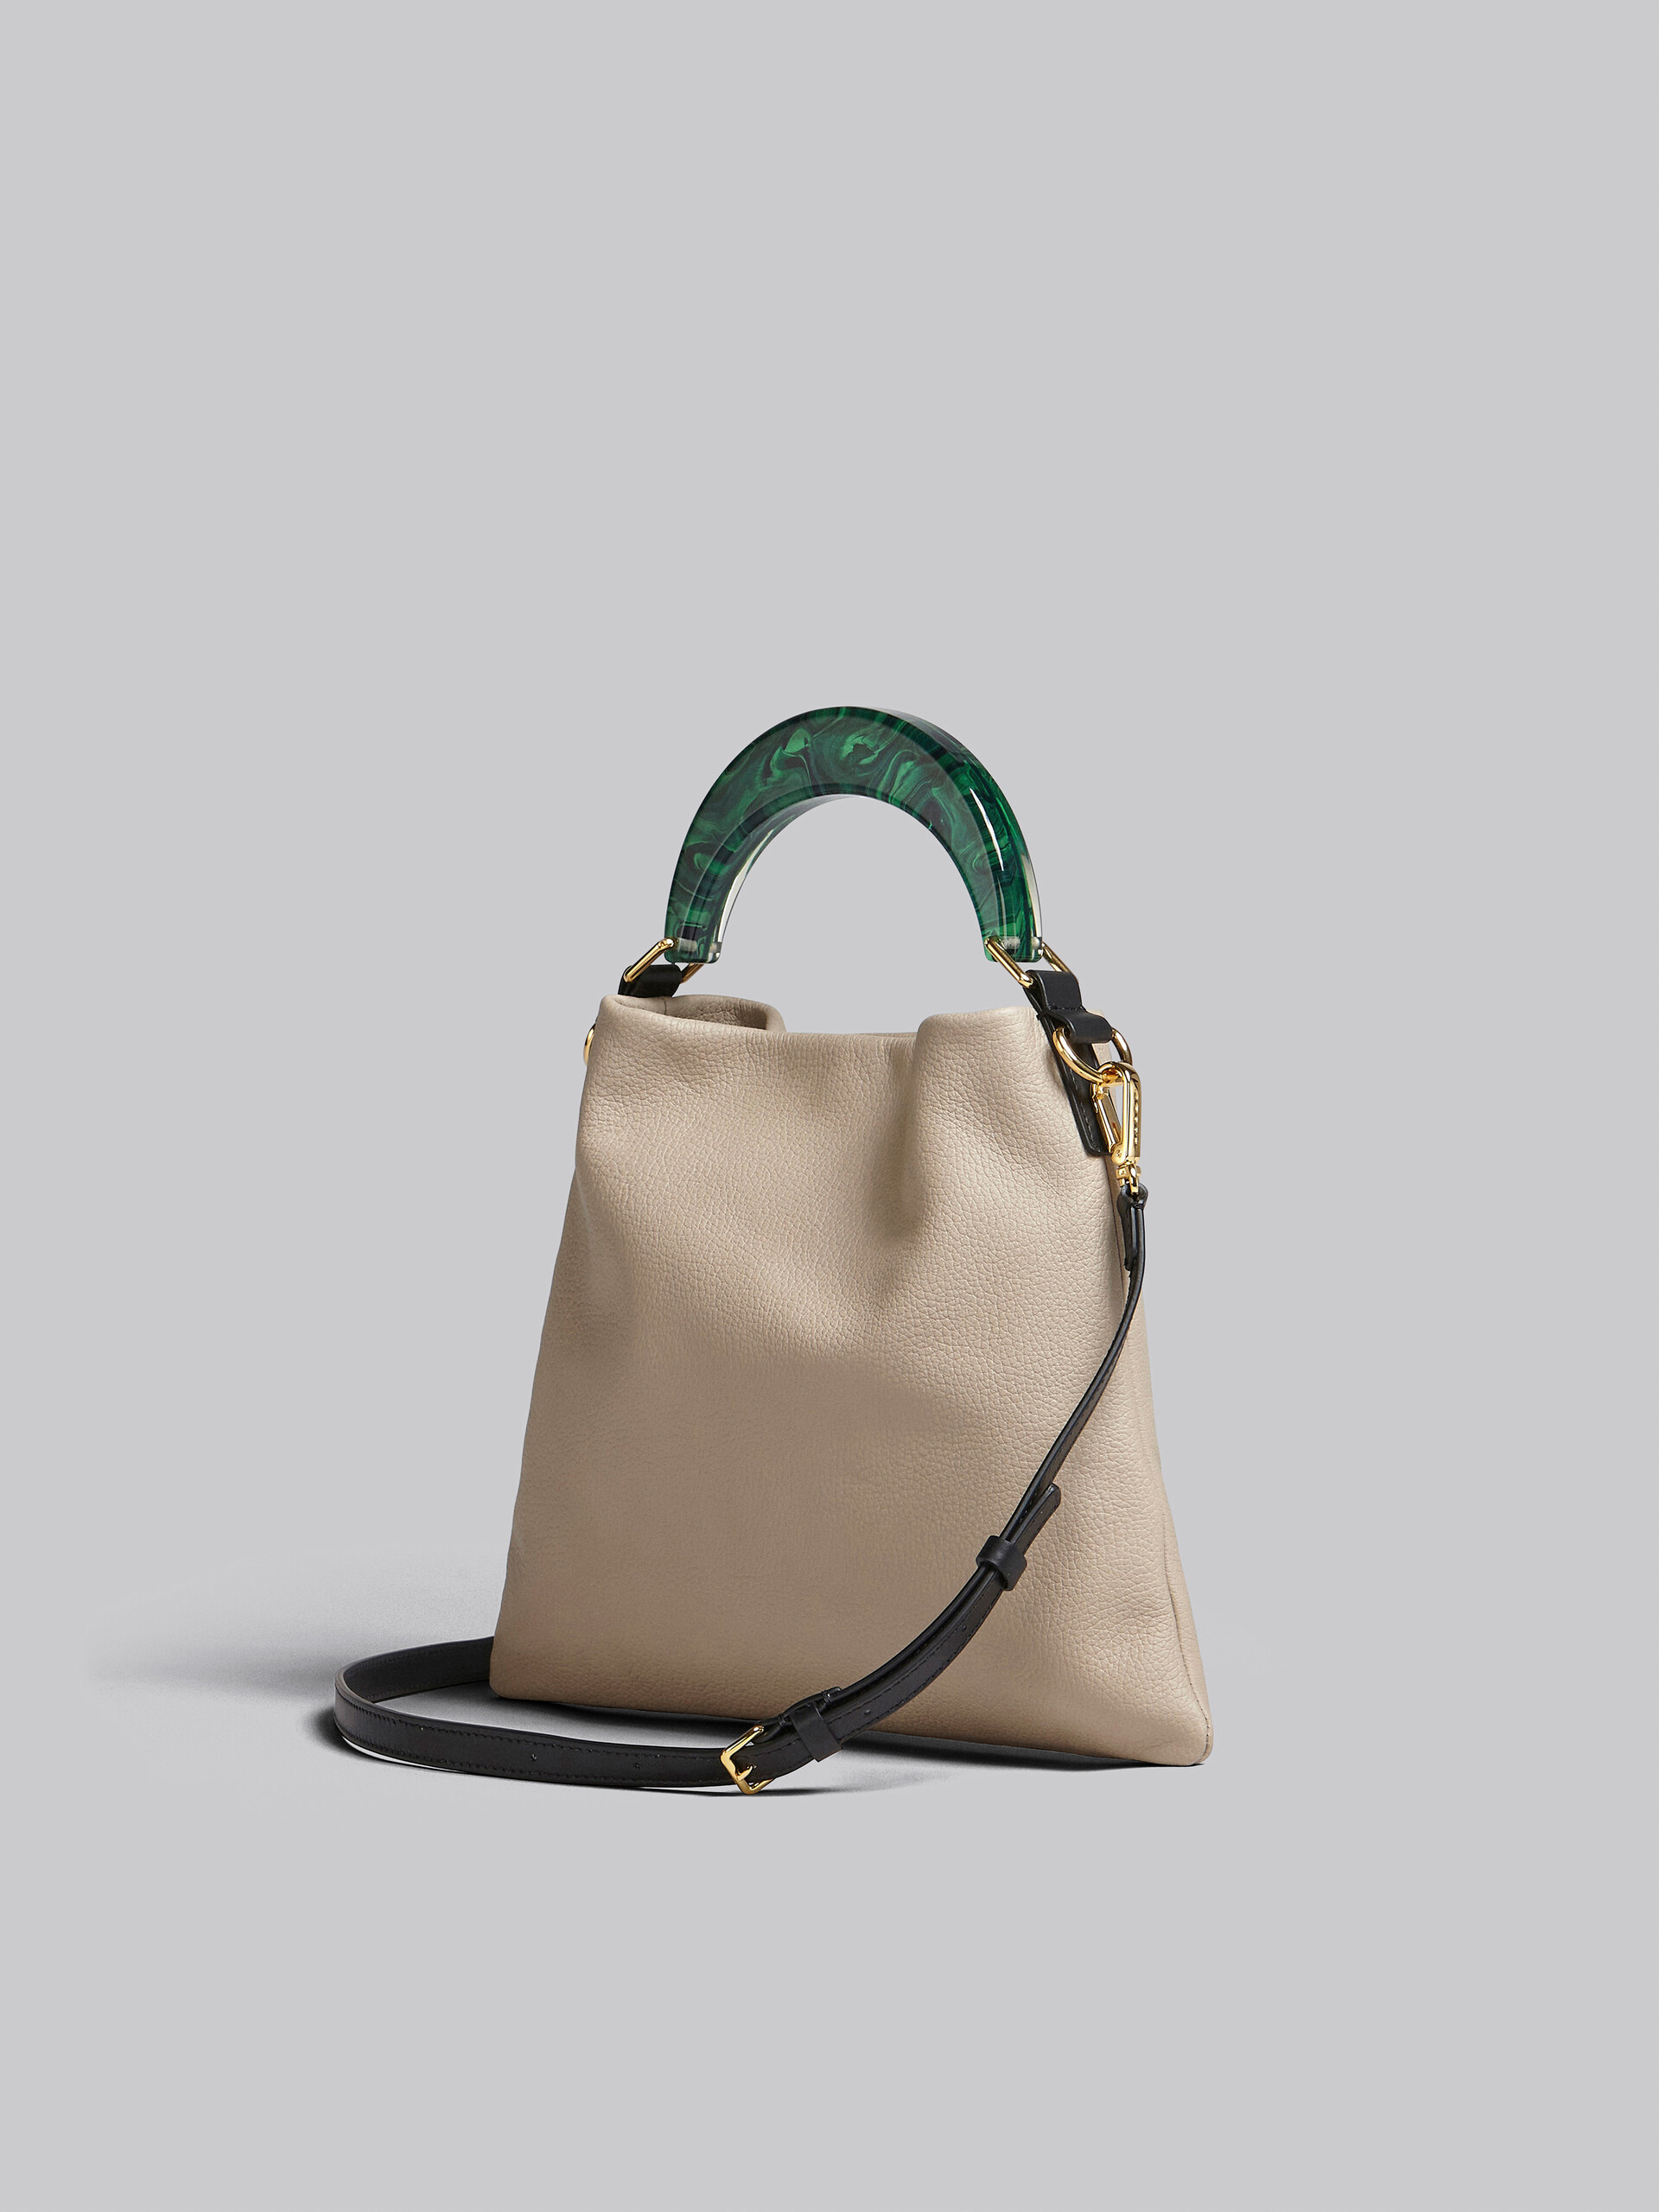 Venice Small Bag in beige leather - Shoulder Bags - Image 3